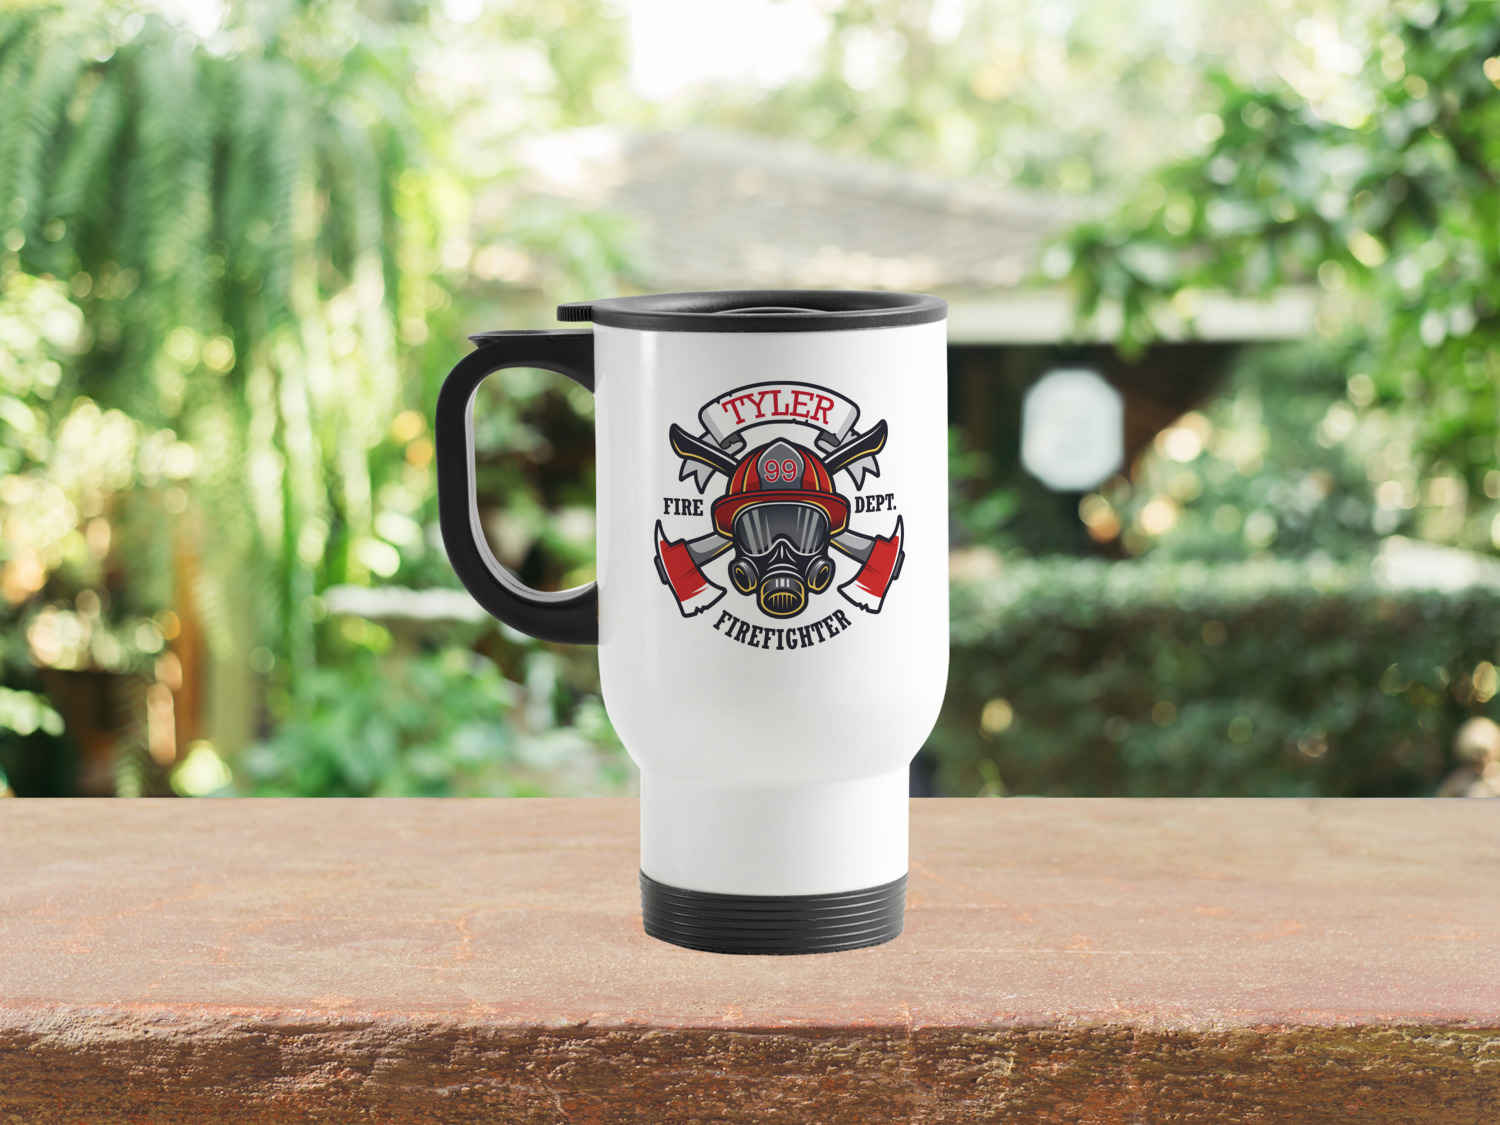 https://www.youcustomizeit.com/common/MAKE/1960007/Firefighter-Stainless-Steel-Travel-Mug-with-Handle-Lifestyle.jpg?lm=1666195570